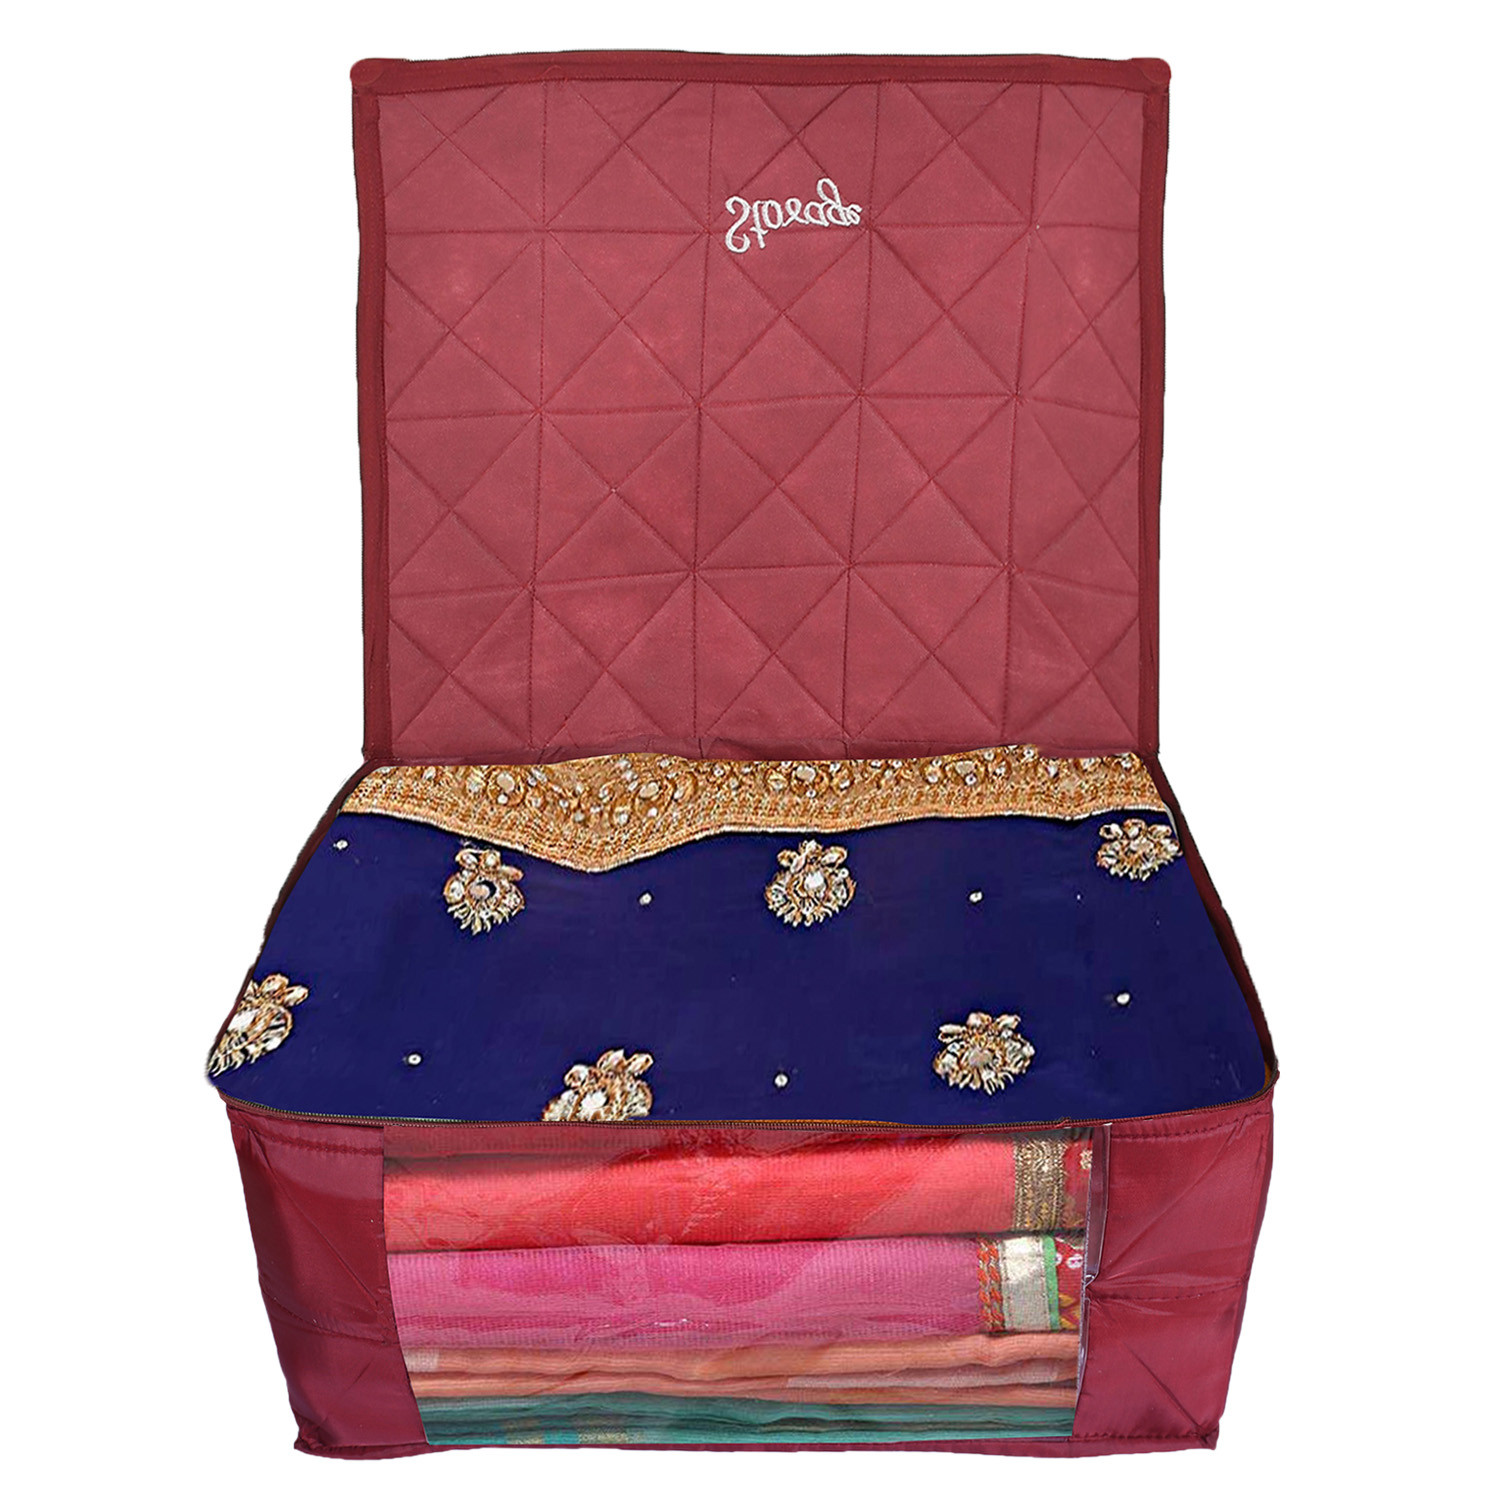 Kuber Industries Designer Saree Cover|Parachute Foldable Clothes For Home & Traveling|With Transparent Window Extra Large,(Maroon)